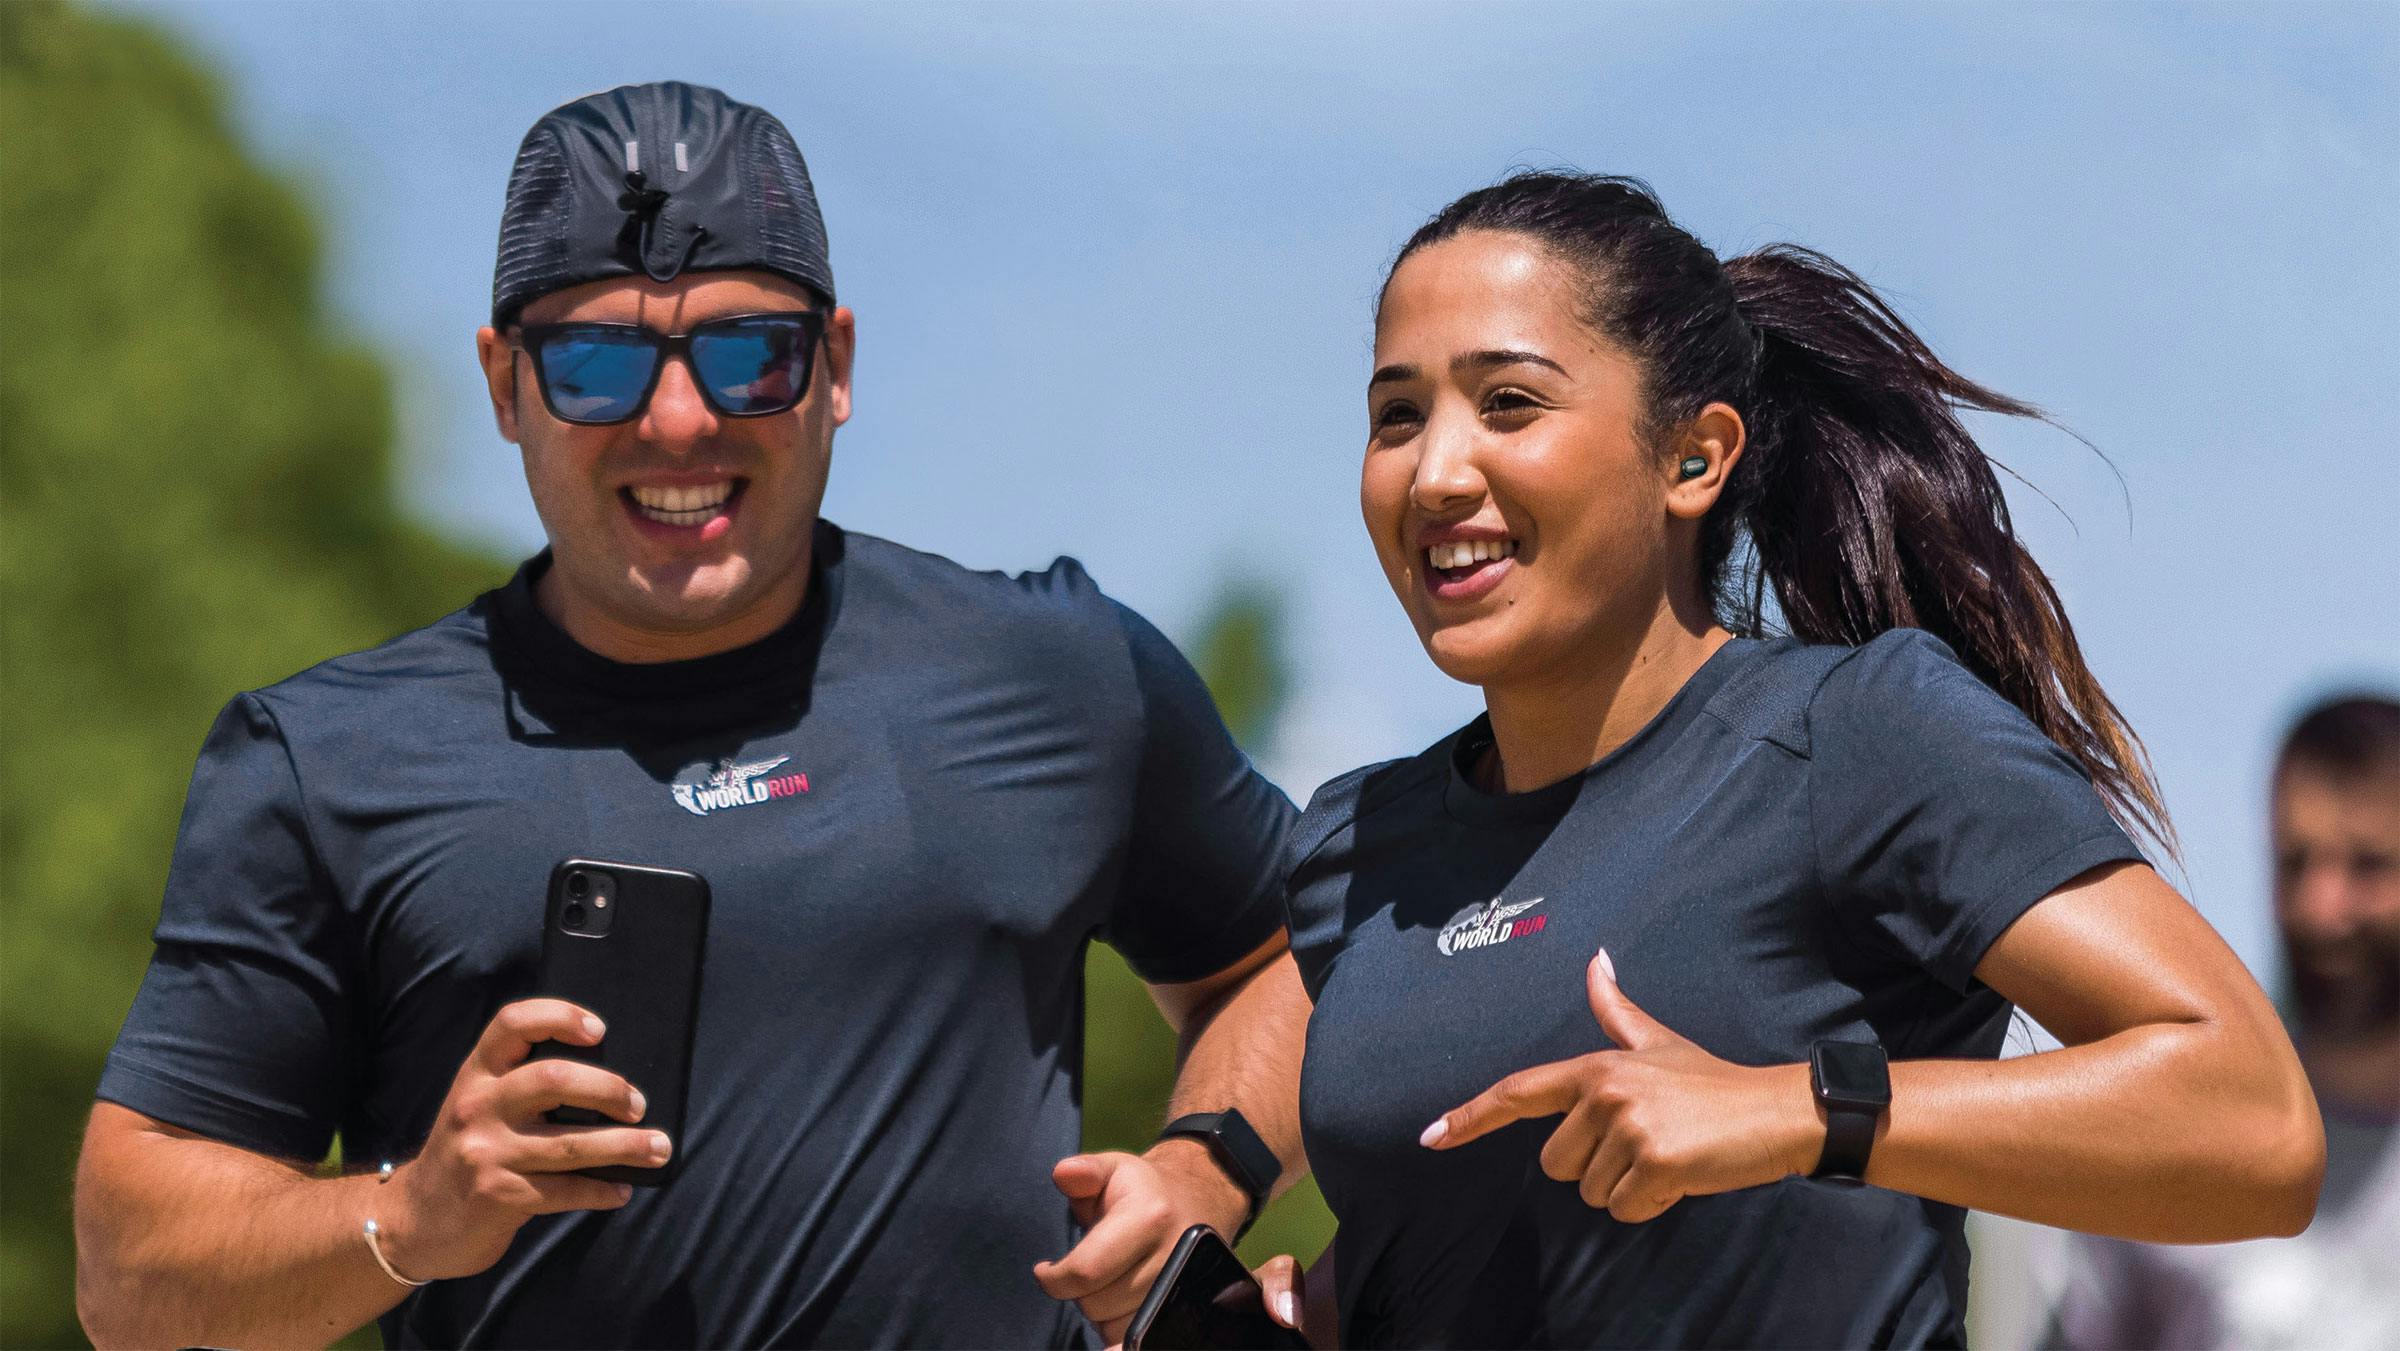 Two runners participating in the Wings for Life World Run